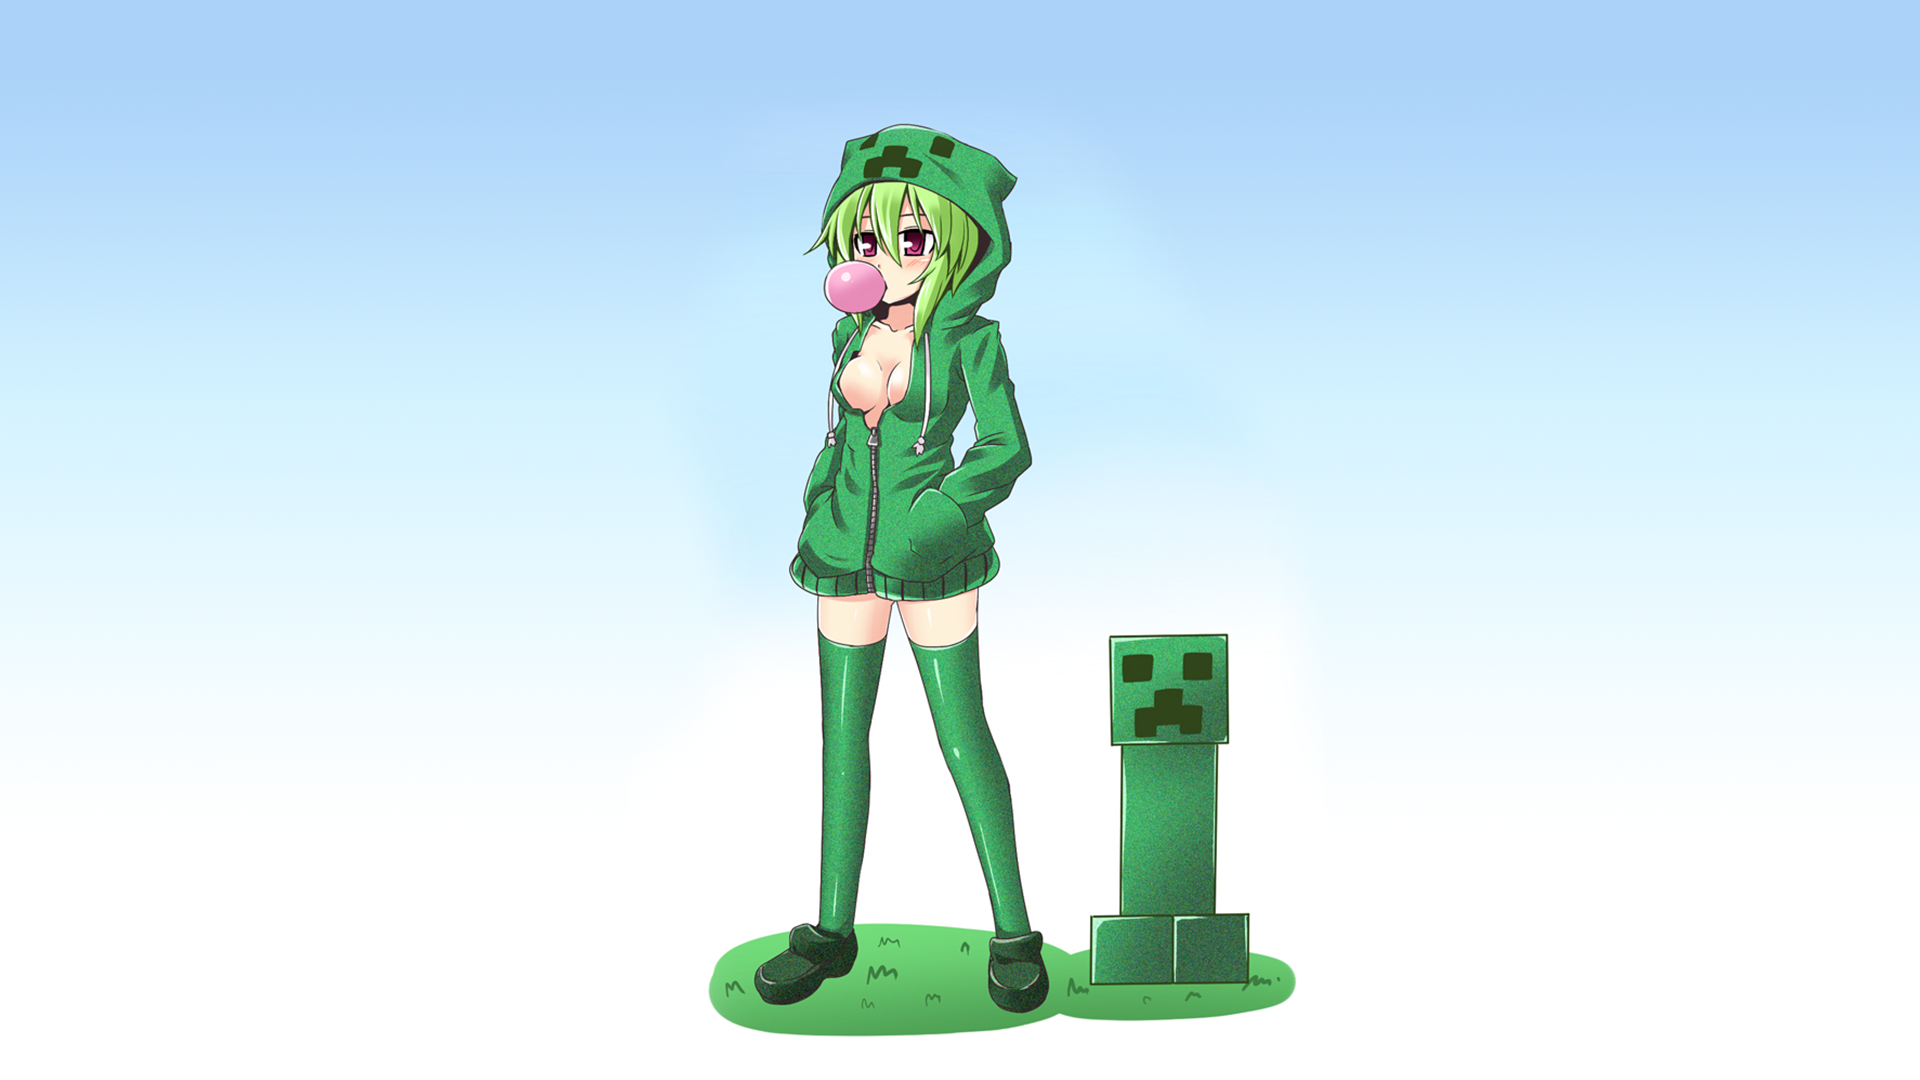 Anime 1920x1080 Minecraft creeper anime girls anime video games PC gaming bubble gum video game art video game girls standing simple background gradient boobs red eyes green hair